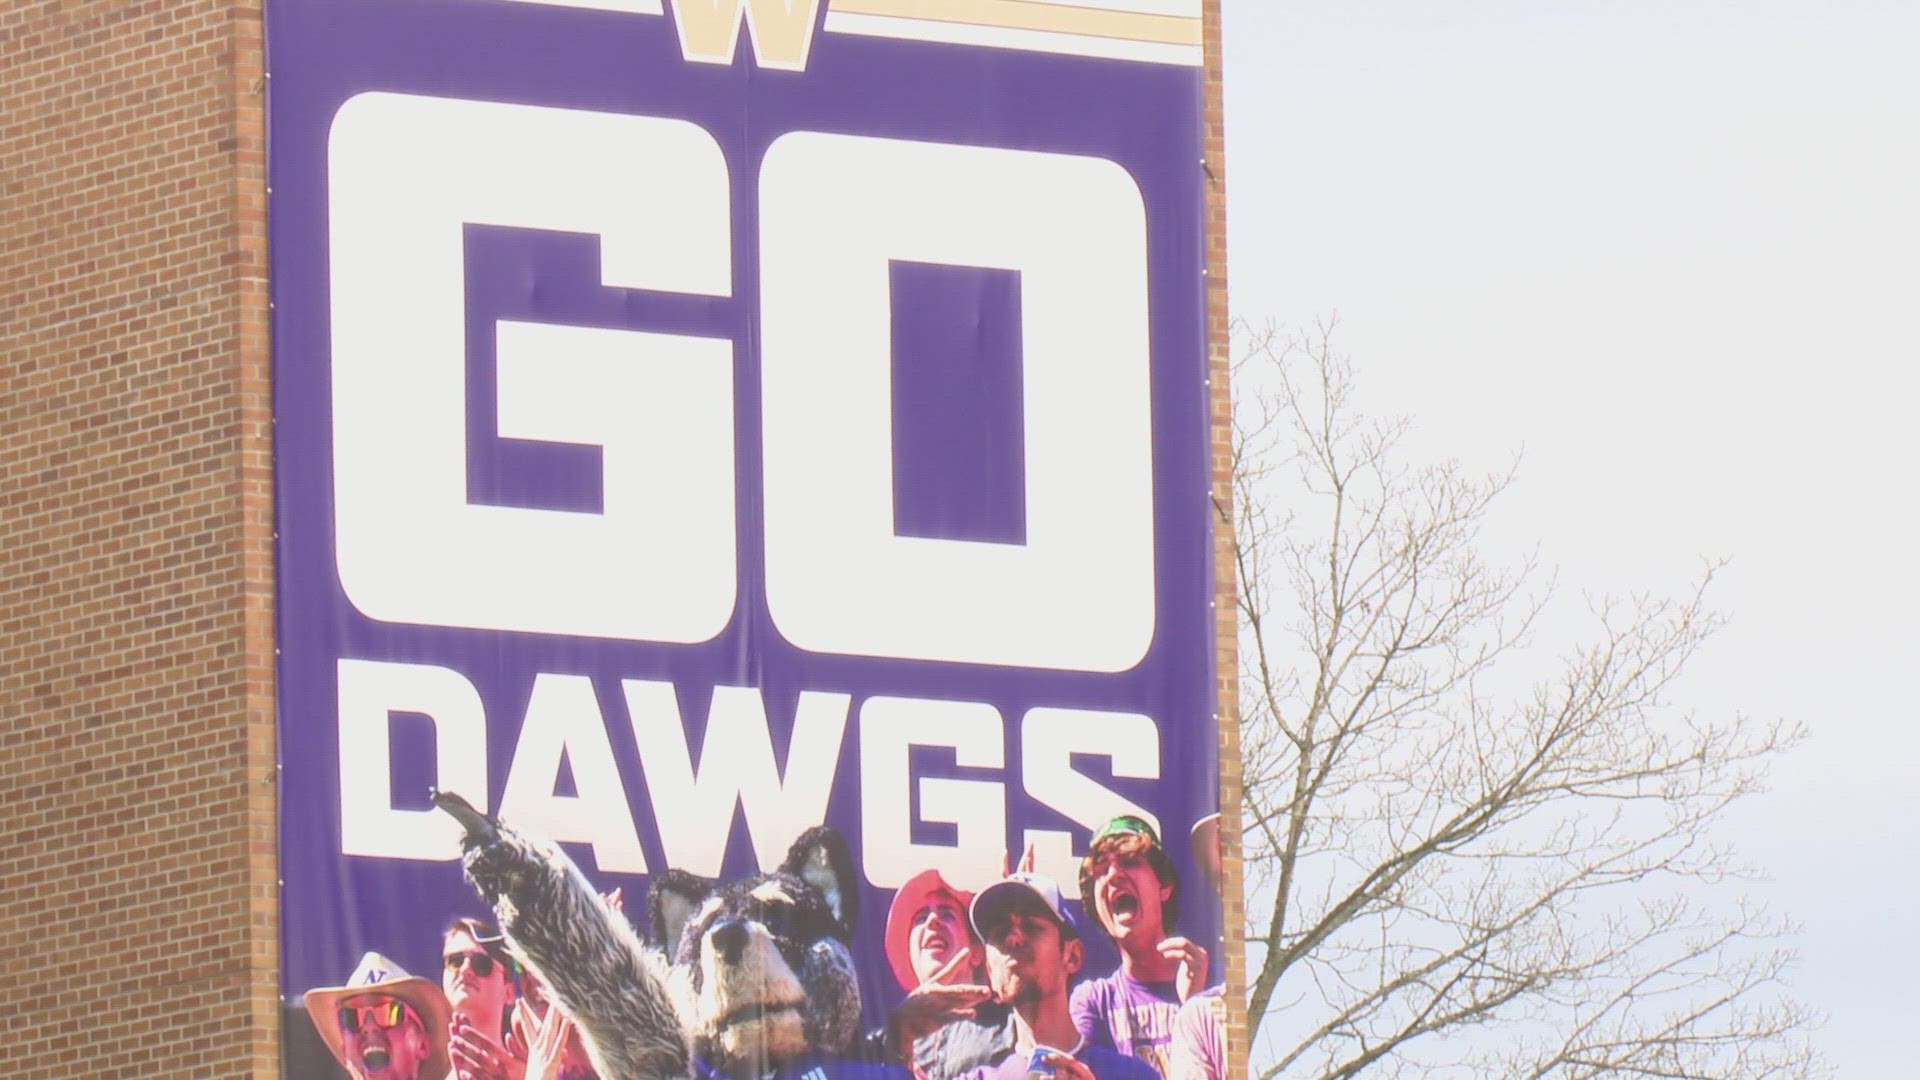 The love for the team has been felt throughout the University of Washington campus.